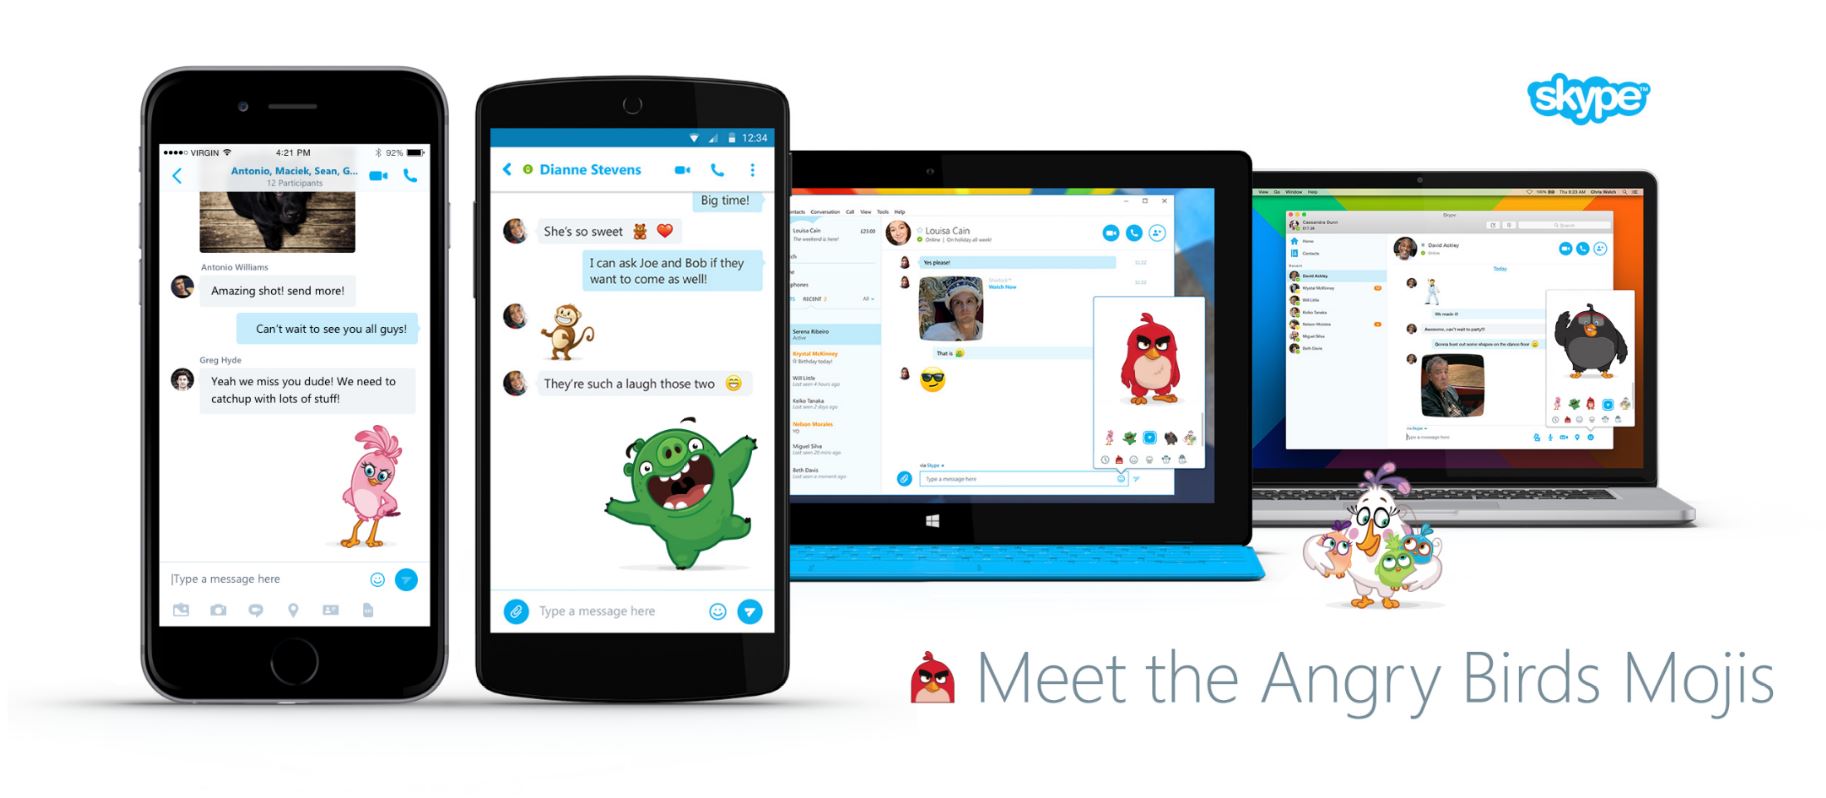 Skype gets new Angry Birds mojis on Windows, Mac, Android, iOS, and Webs